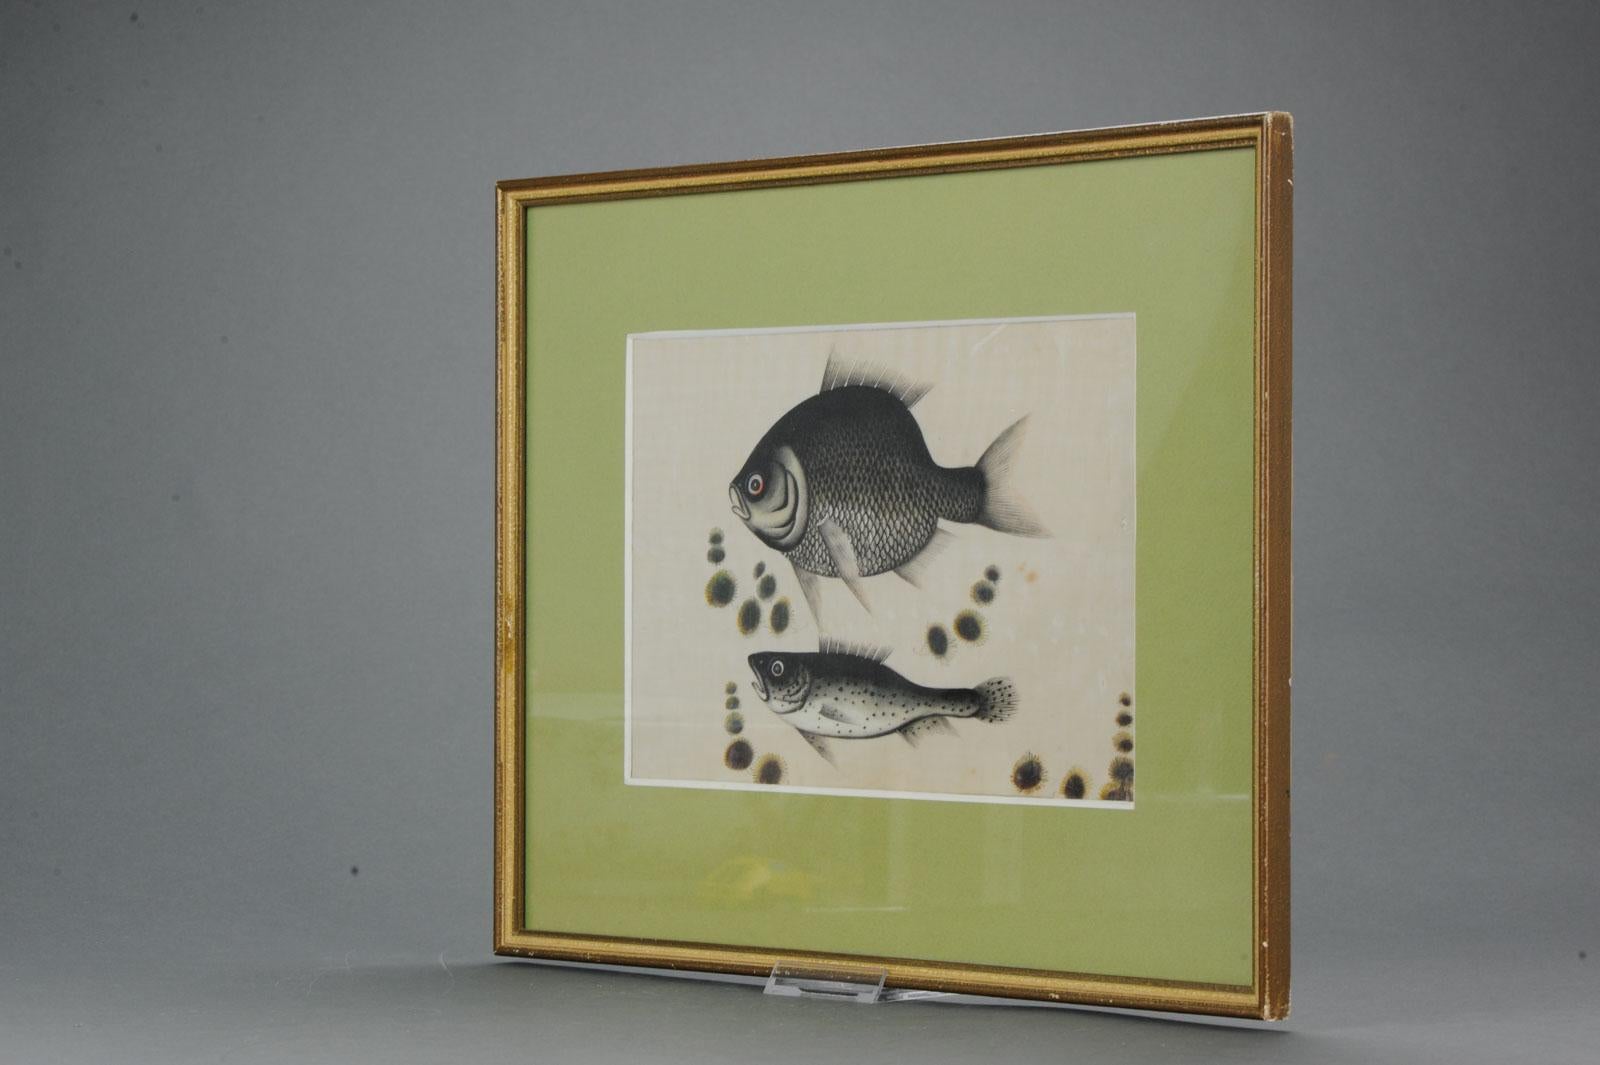 Antique Chinese or Japanese Fish Painting China Japan Qing / Edo or Meiji.

A very nice painting.

Additional information:
Type: Paintings, Scrolls & Prints
Country of Manufacturing: Japan
Region of Origin: Japan
Period: 19th century Edo Period